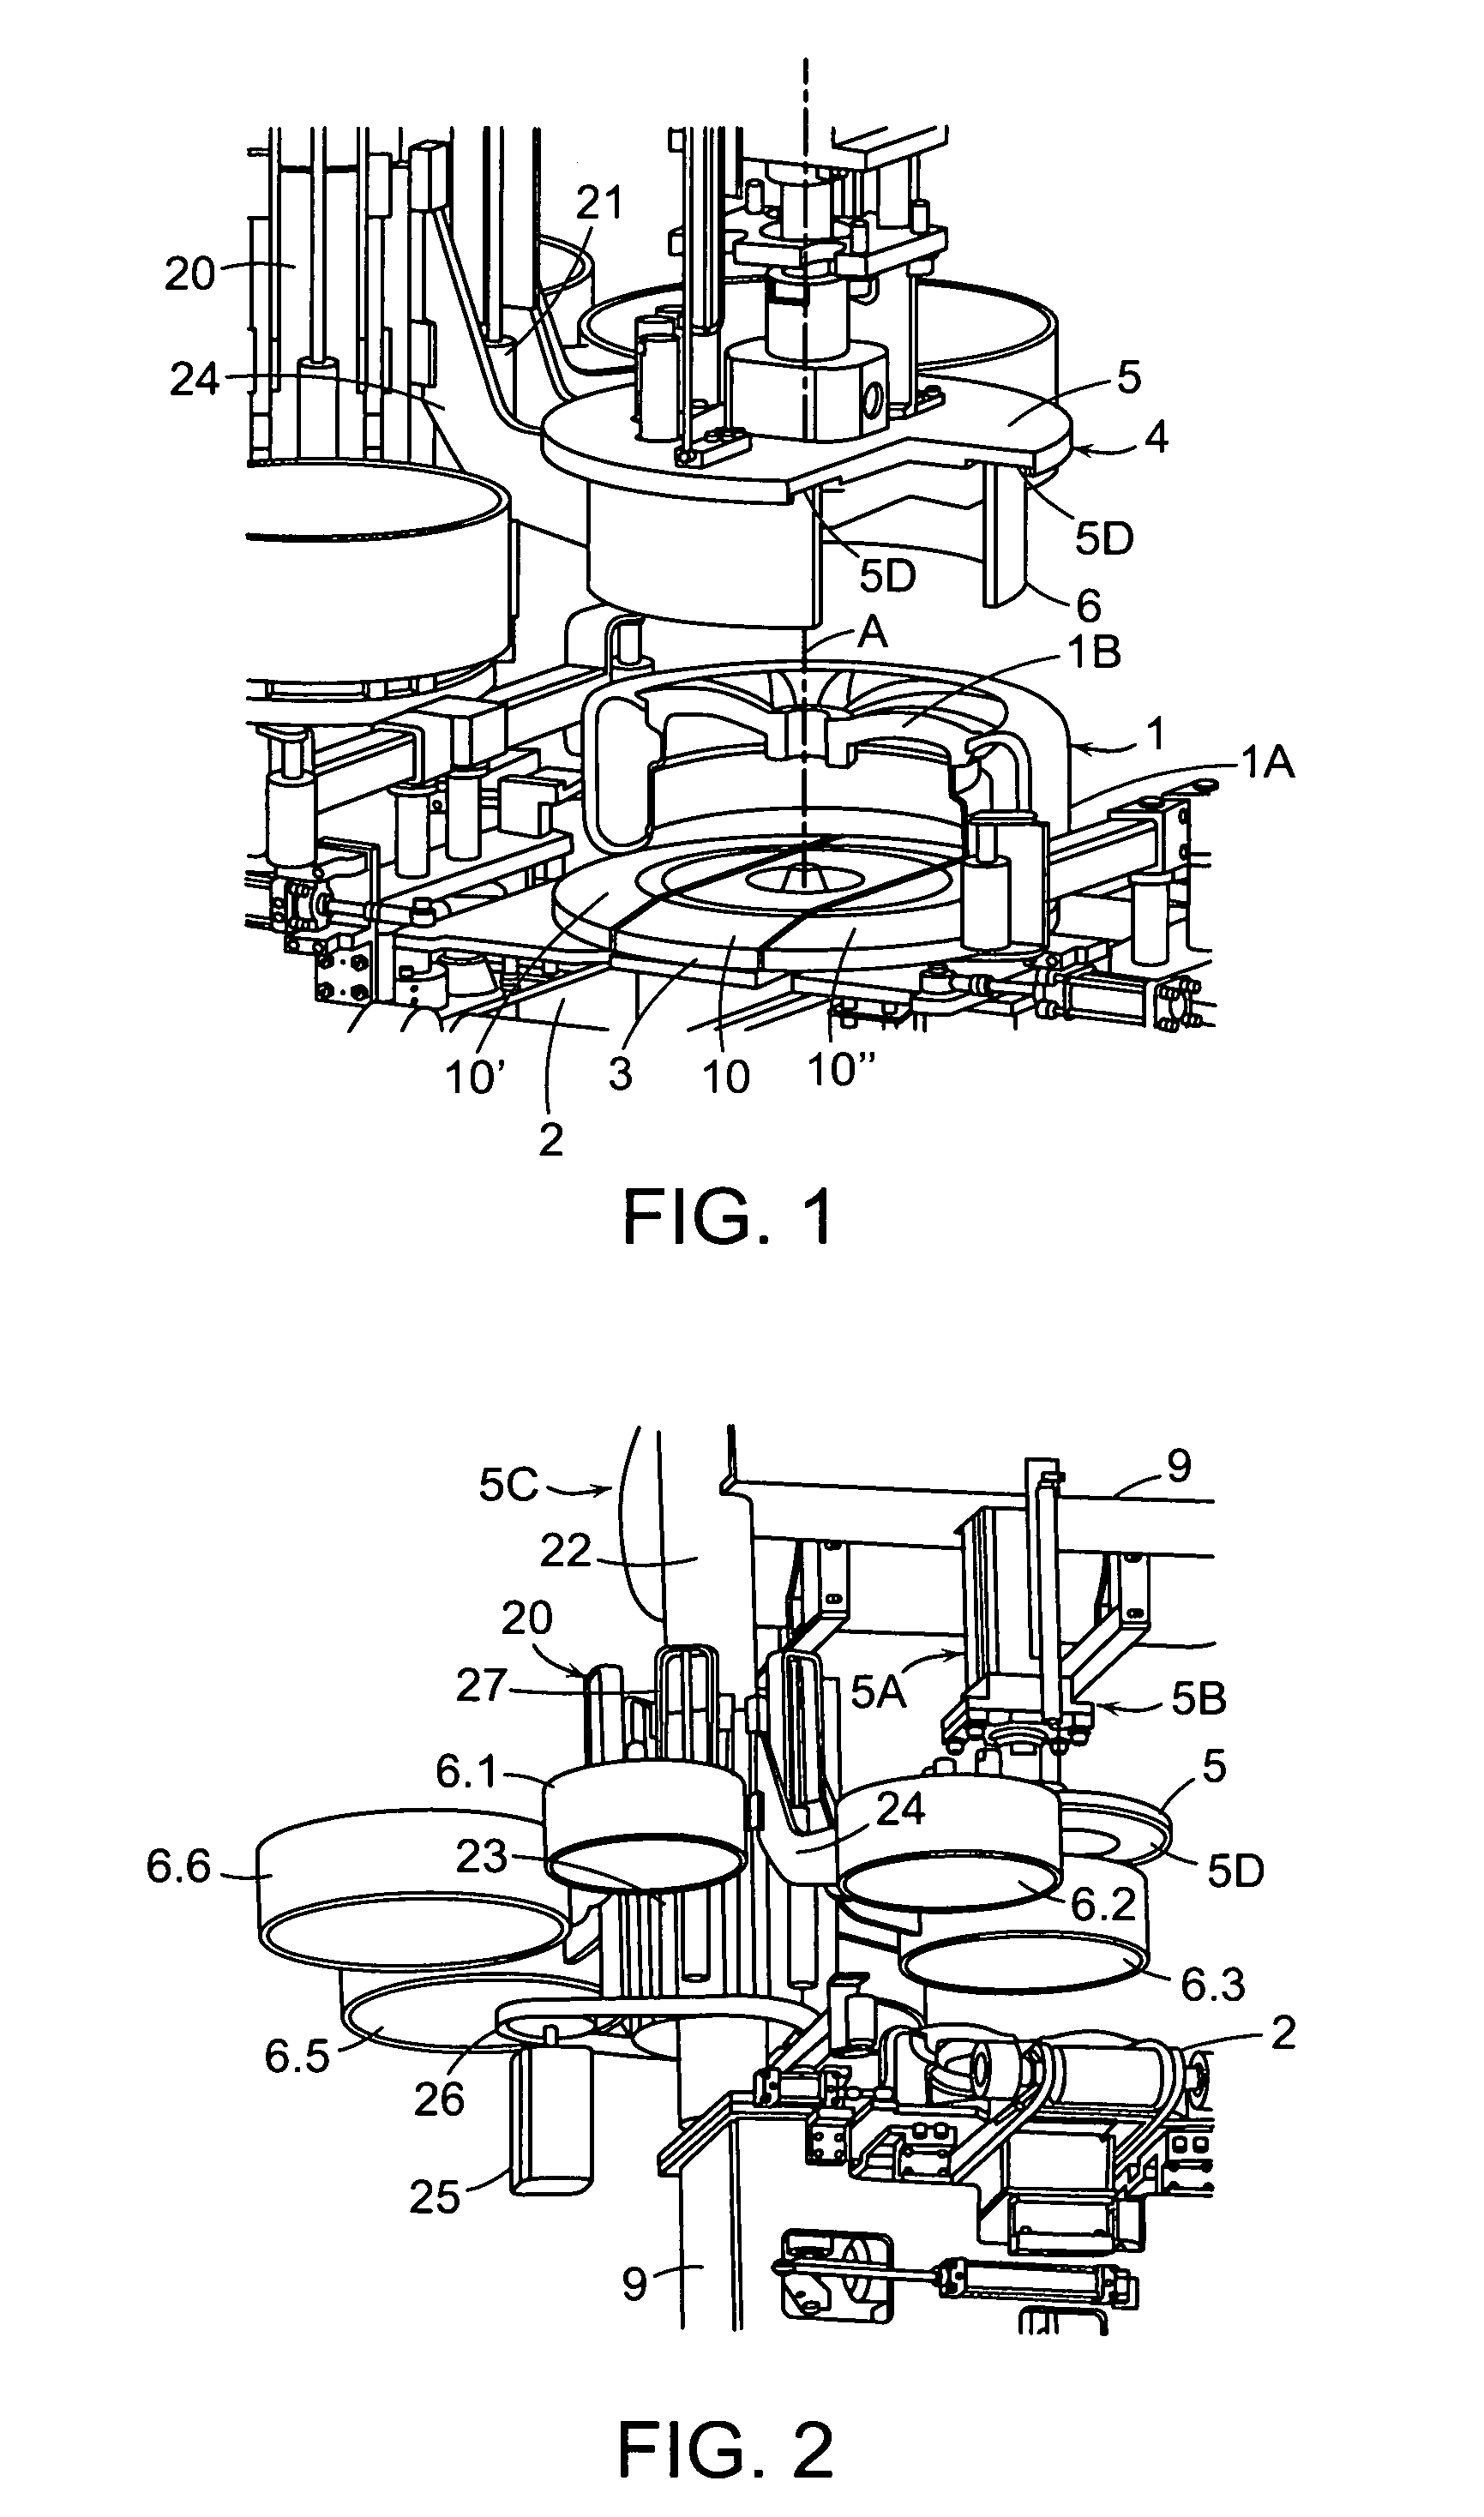 Multi-size tire filling apparatus and method